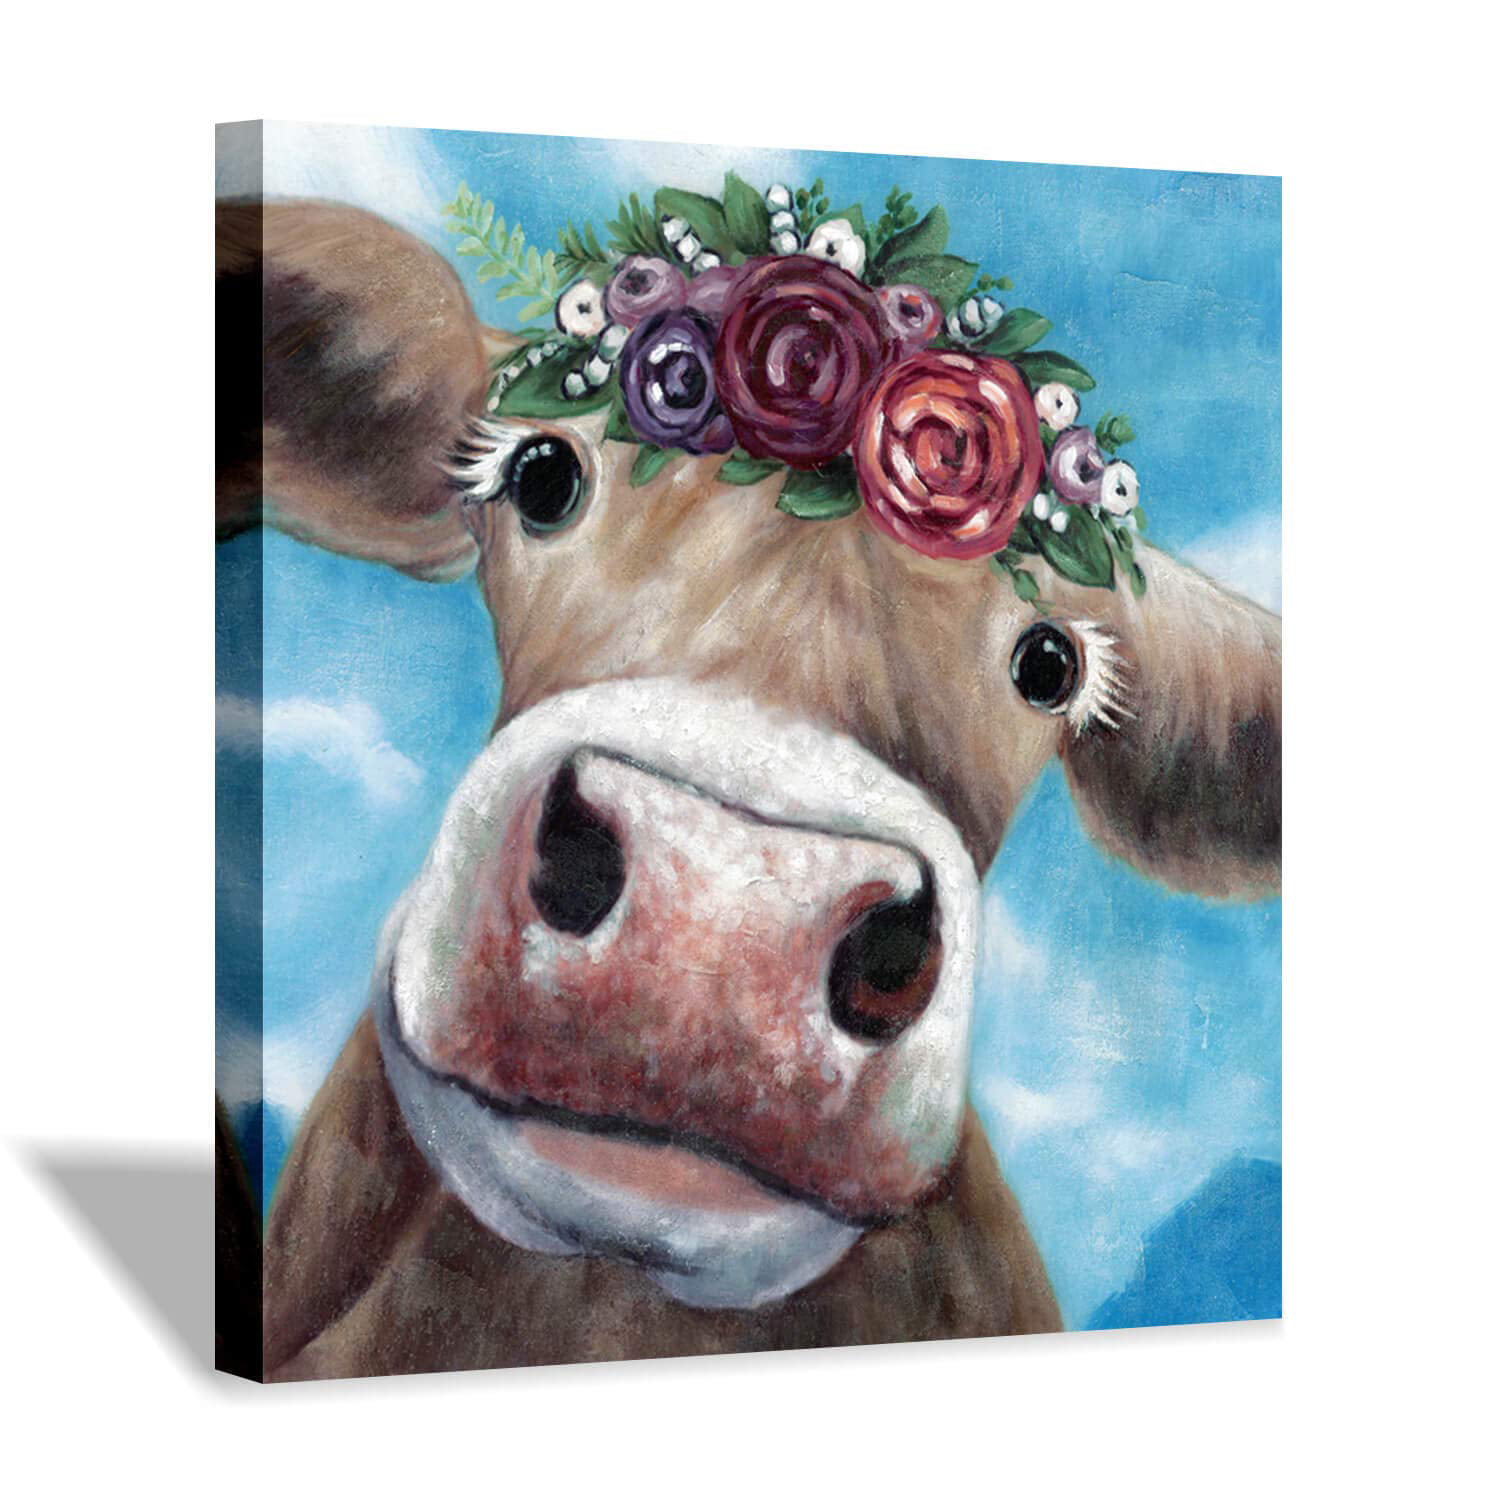 LIVEDITOR Farm Animal Cute Cow Painting on Canvas Wall Art for Living Room  (24'' x 24'' x 1 Panel) 